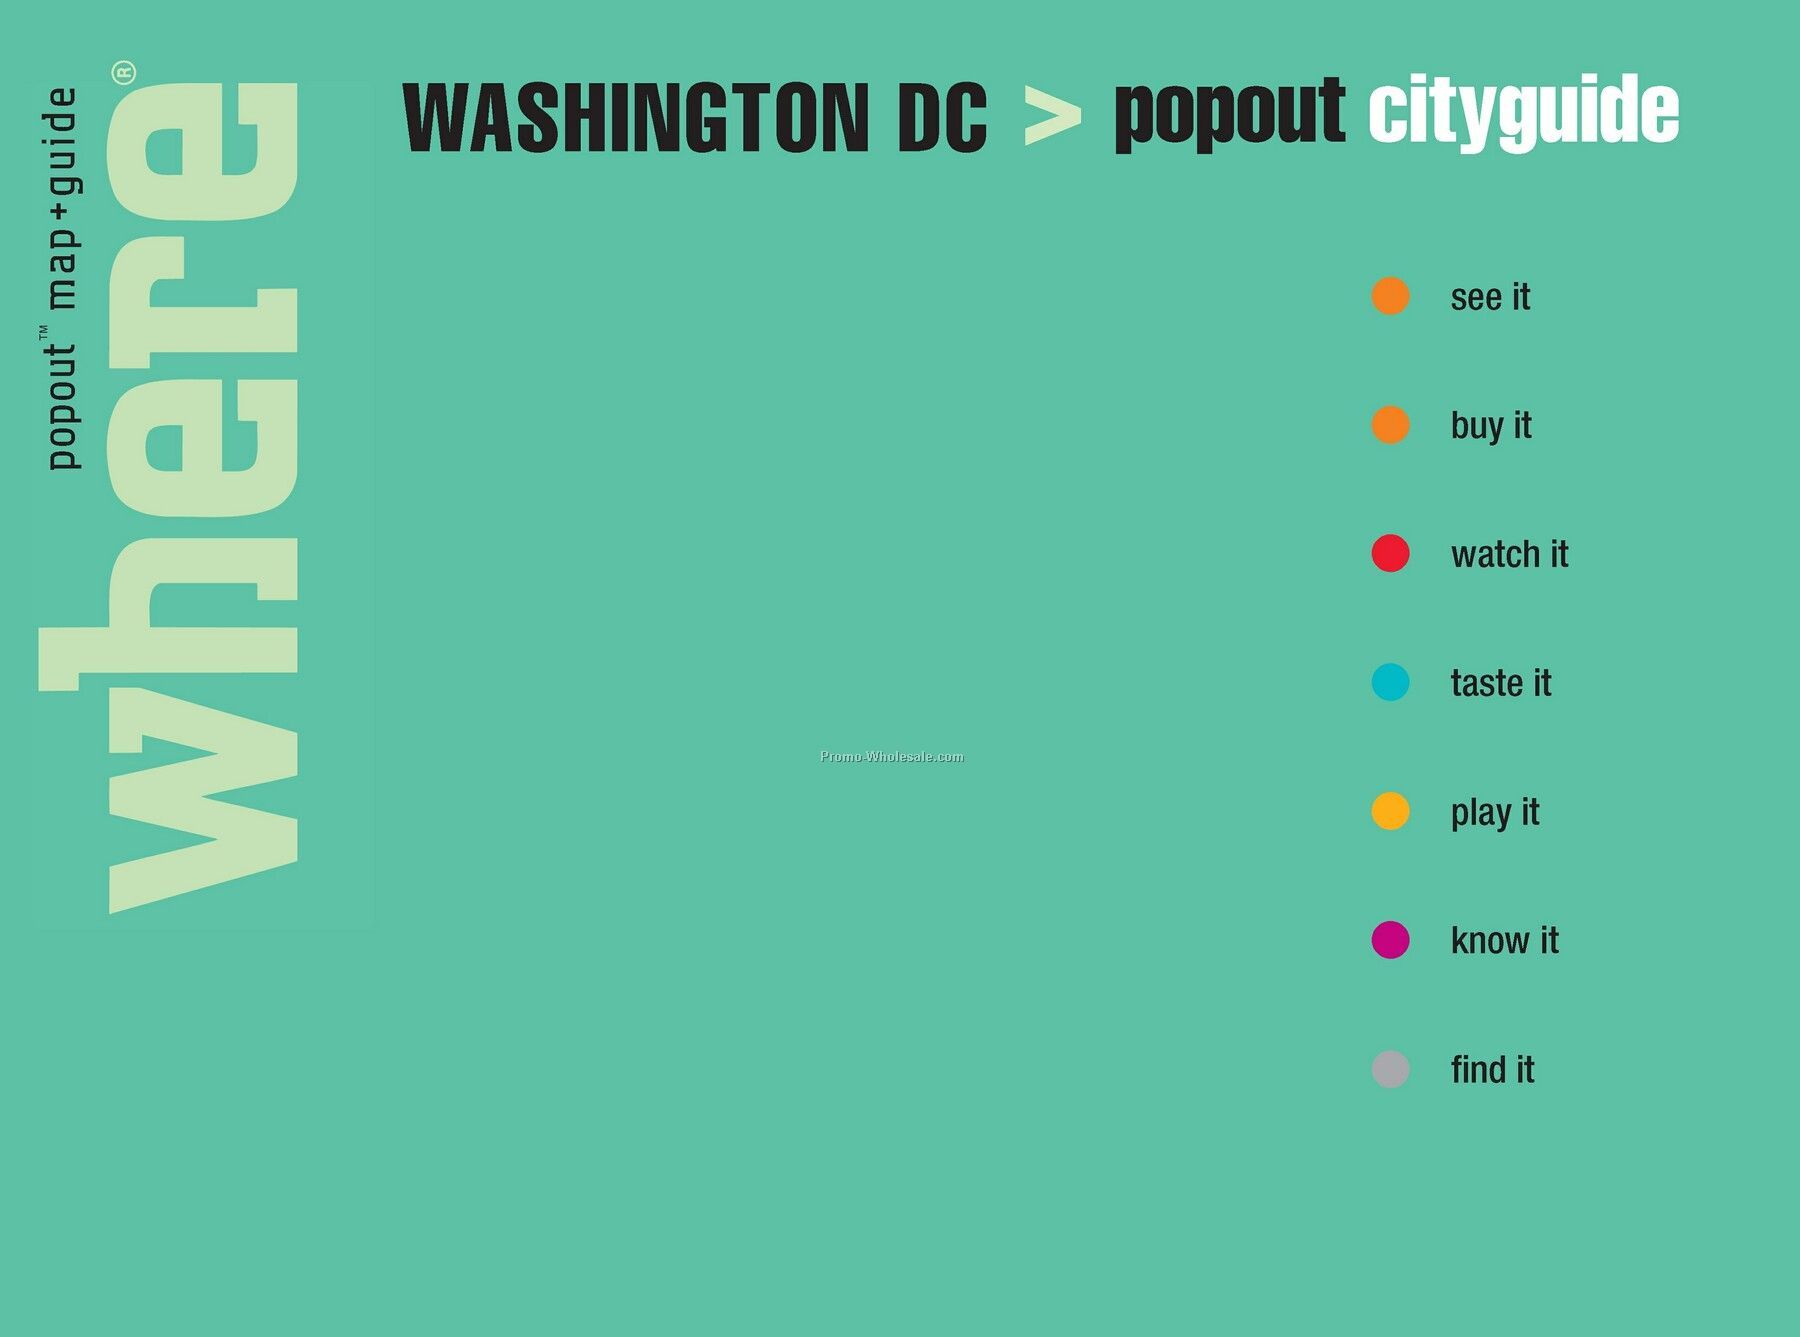 Travel Guides - City Guide Of Washington D.c. - Featuring Popout Maps